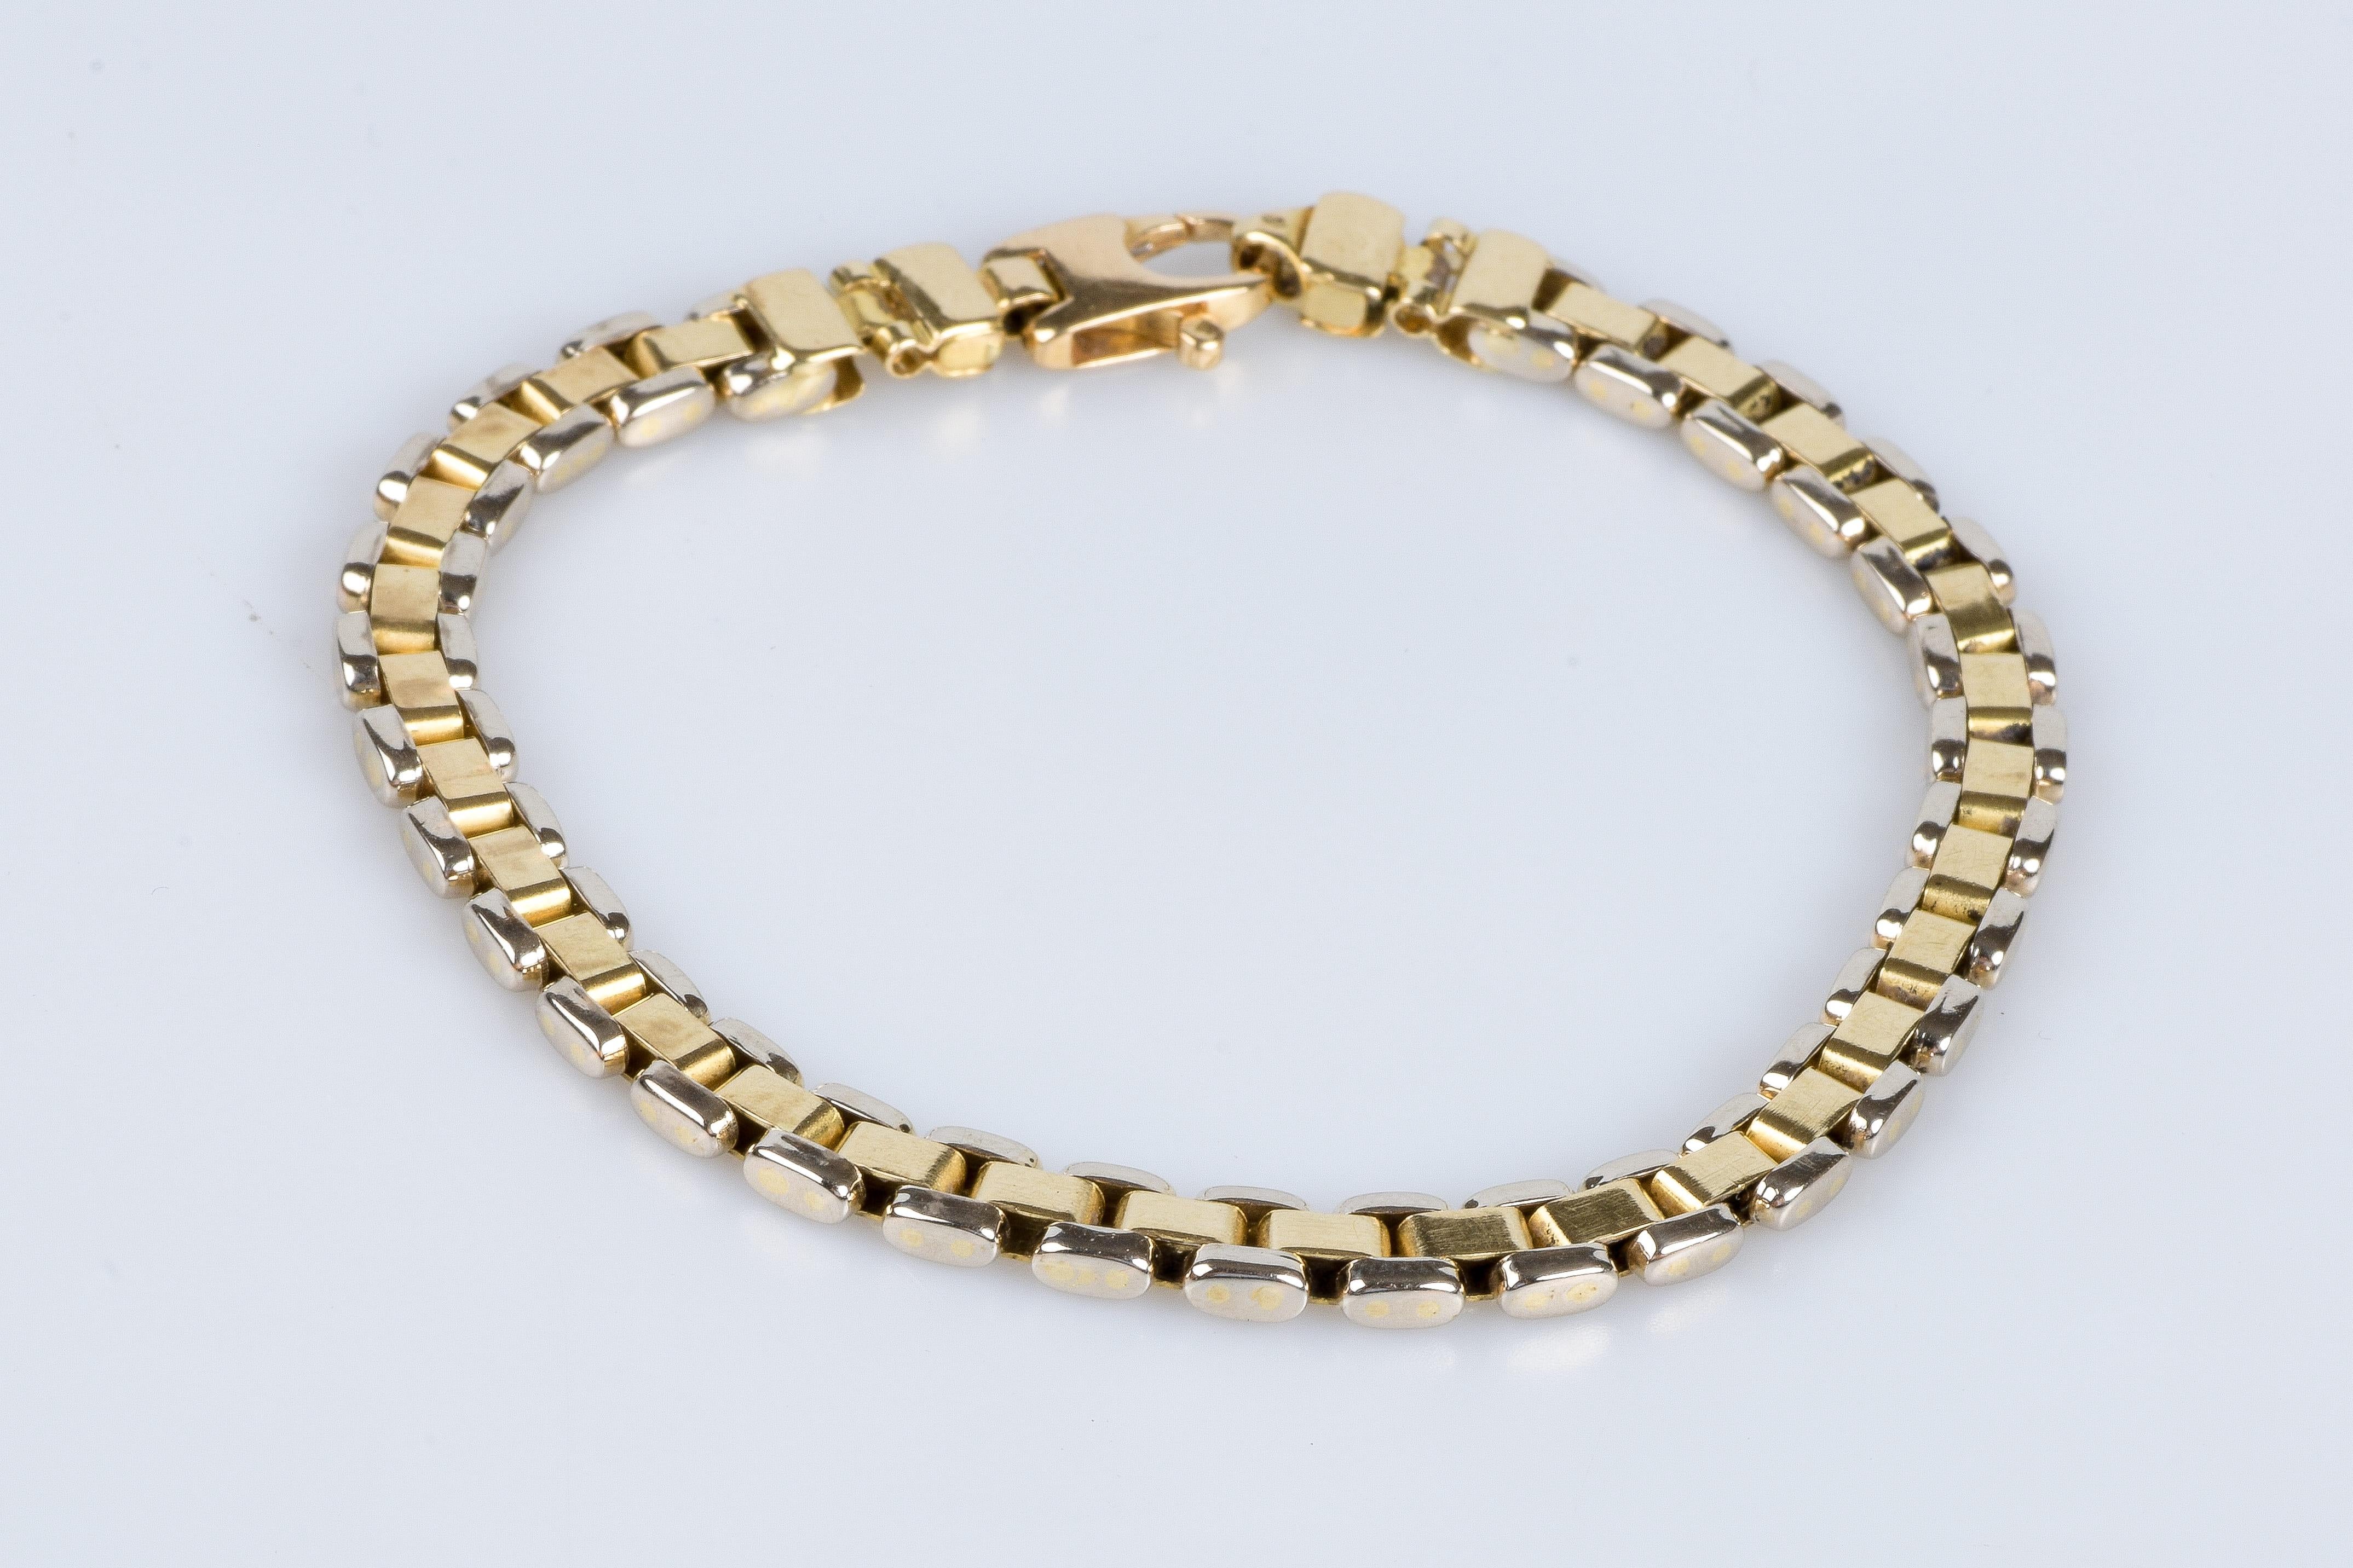 Men’s bracelet in soft 18K yellow and white bicolor gold mesh. The combination of yellow gold and white gold gives the bracelet an elegant and modern look.

Weight: 14.3 gr 

Dimensions: 20 cm x 0.5cm x 0.2

Gold mark on the jewel.  

Status: As